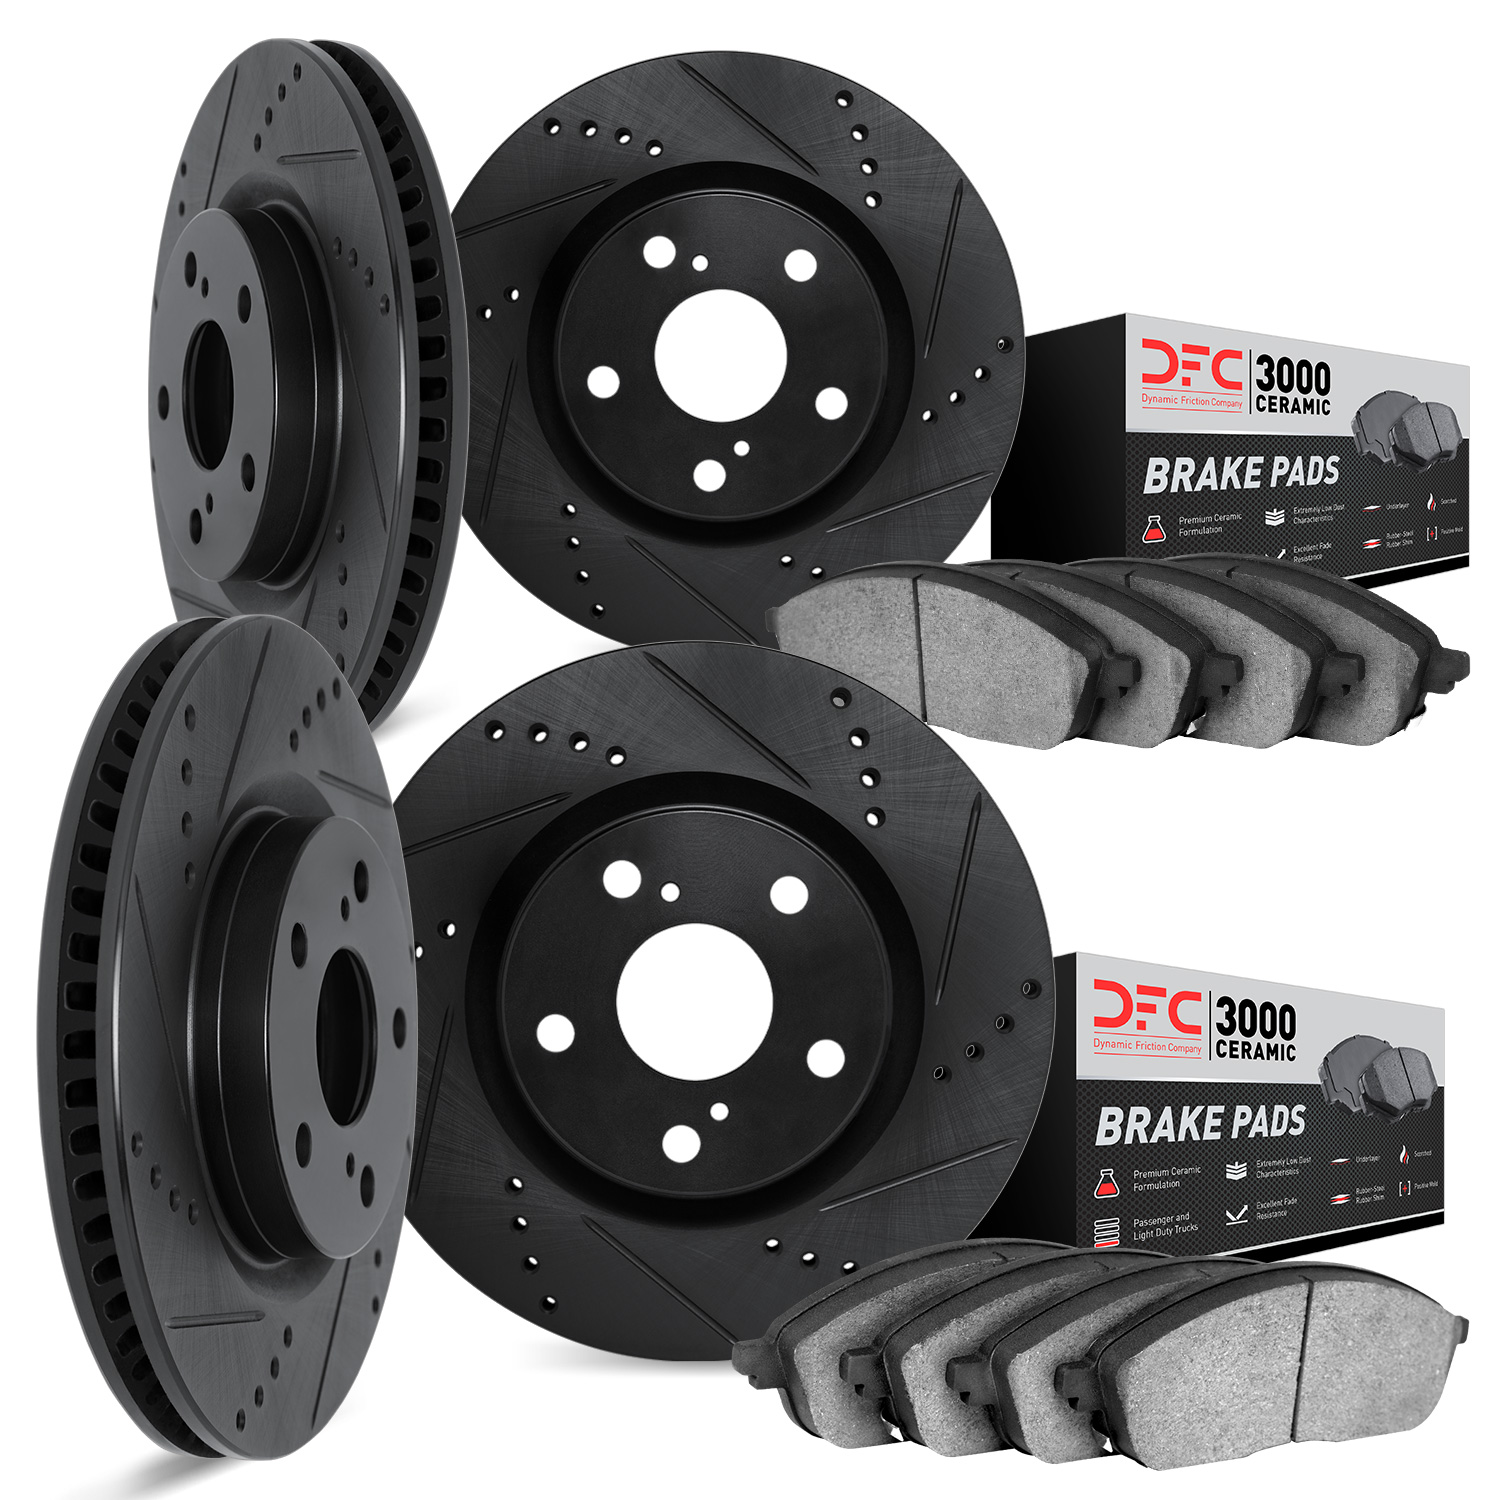 8304-67078 Drilled/Slotted Brake Rotors with 3000-Series Ceramic Brake Pads Kit [Black], Fits Select Infiniti/Nissan, Position: